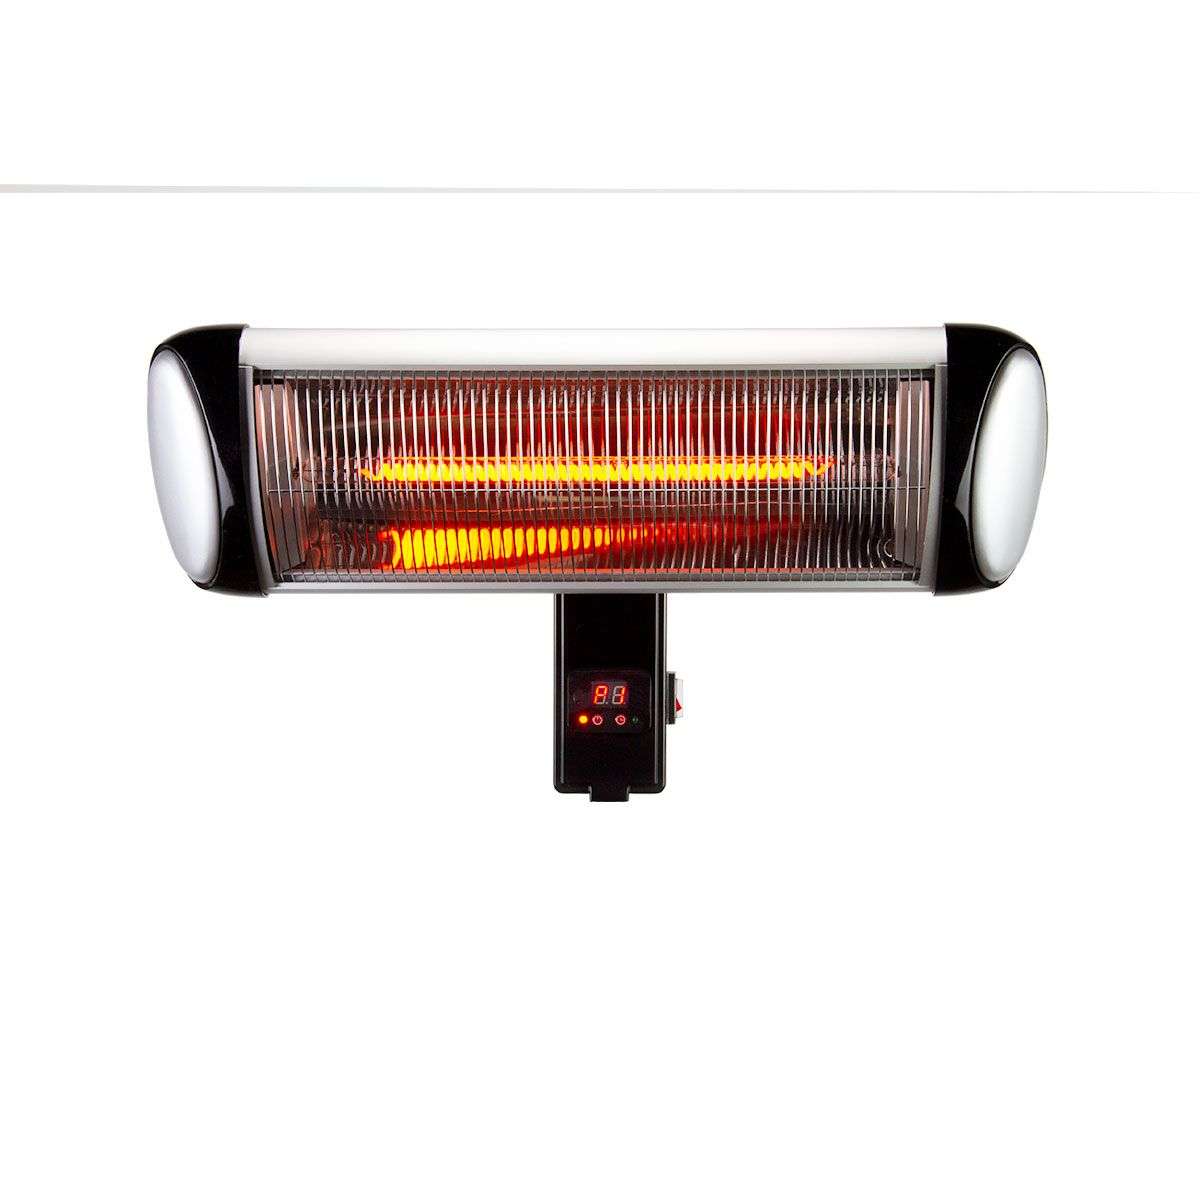 131 reference of Are Patio Heaters Safe To Use In A Garage ...